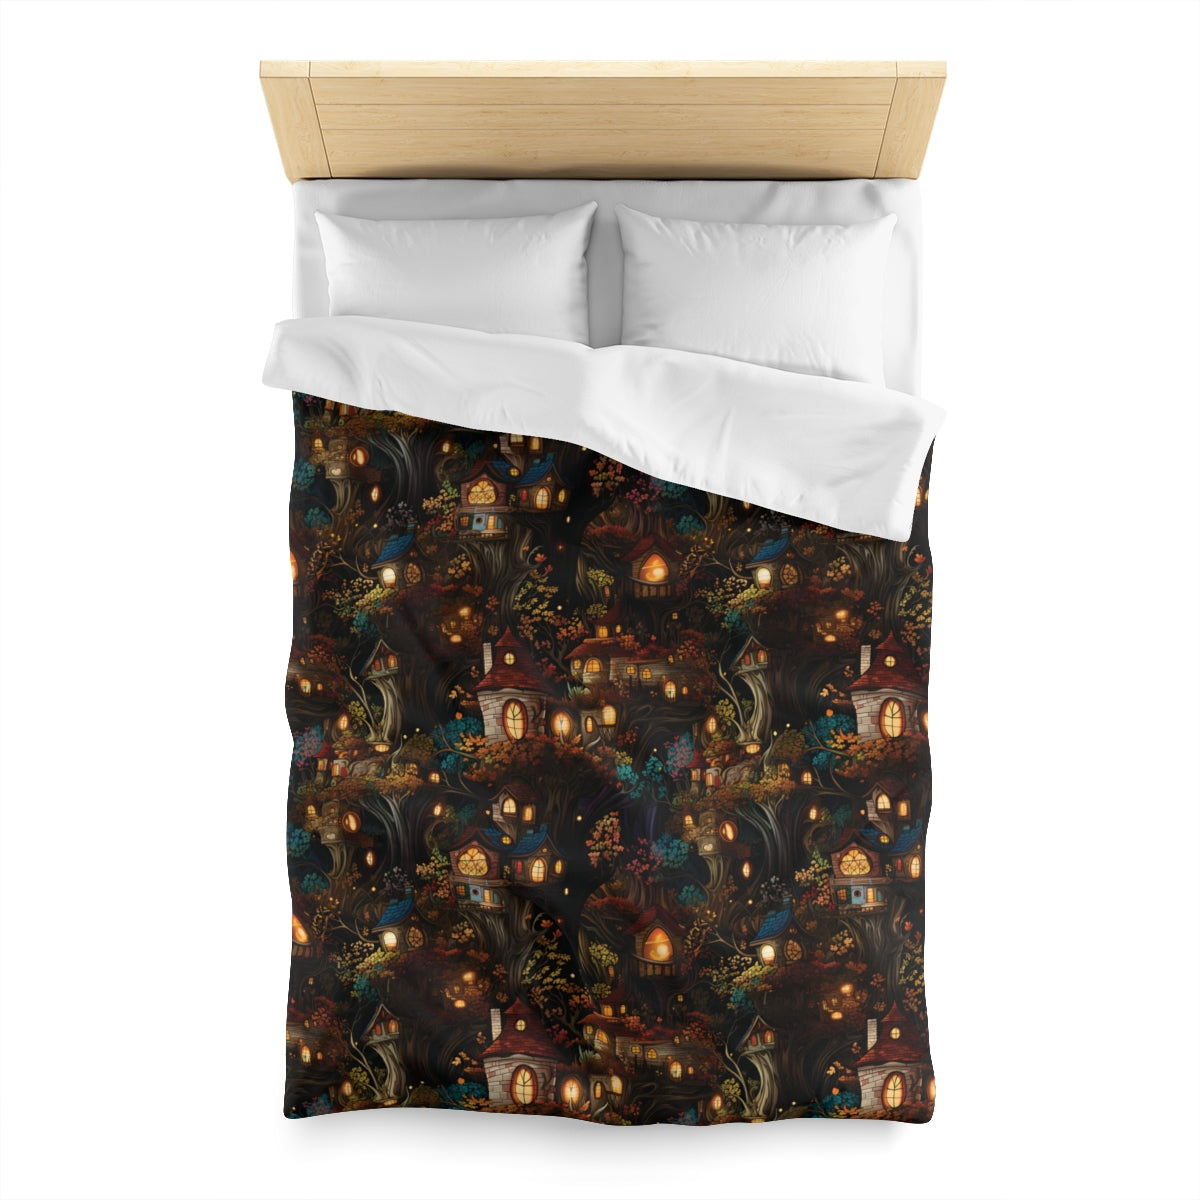 Pixie Fairy Hideaway Duvet Cover with Pillow Shams